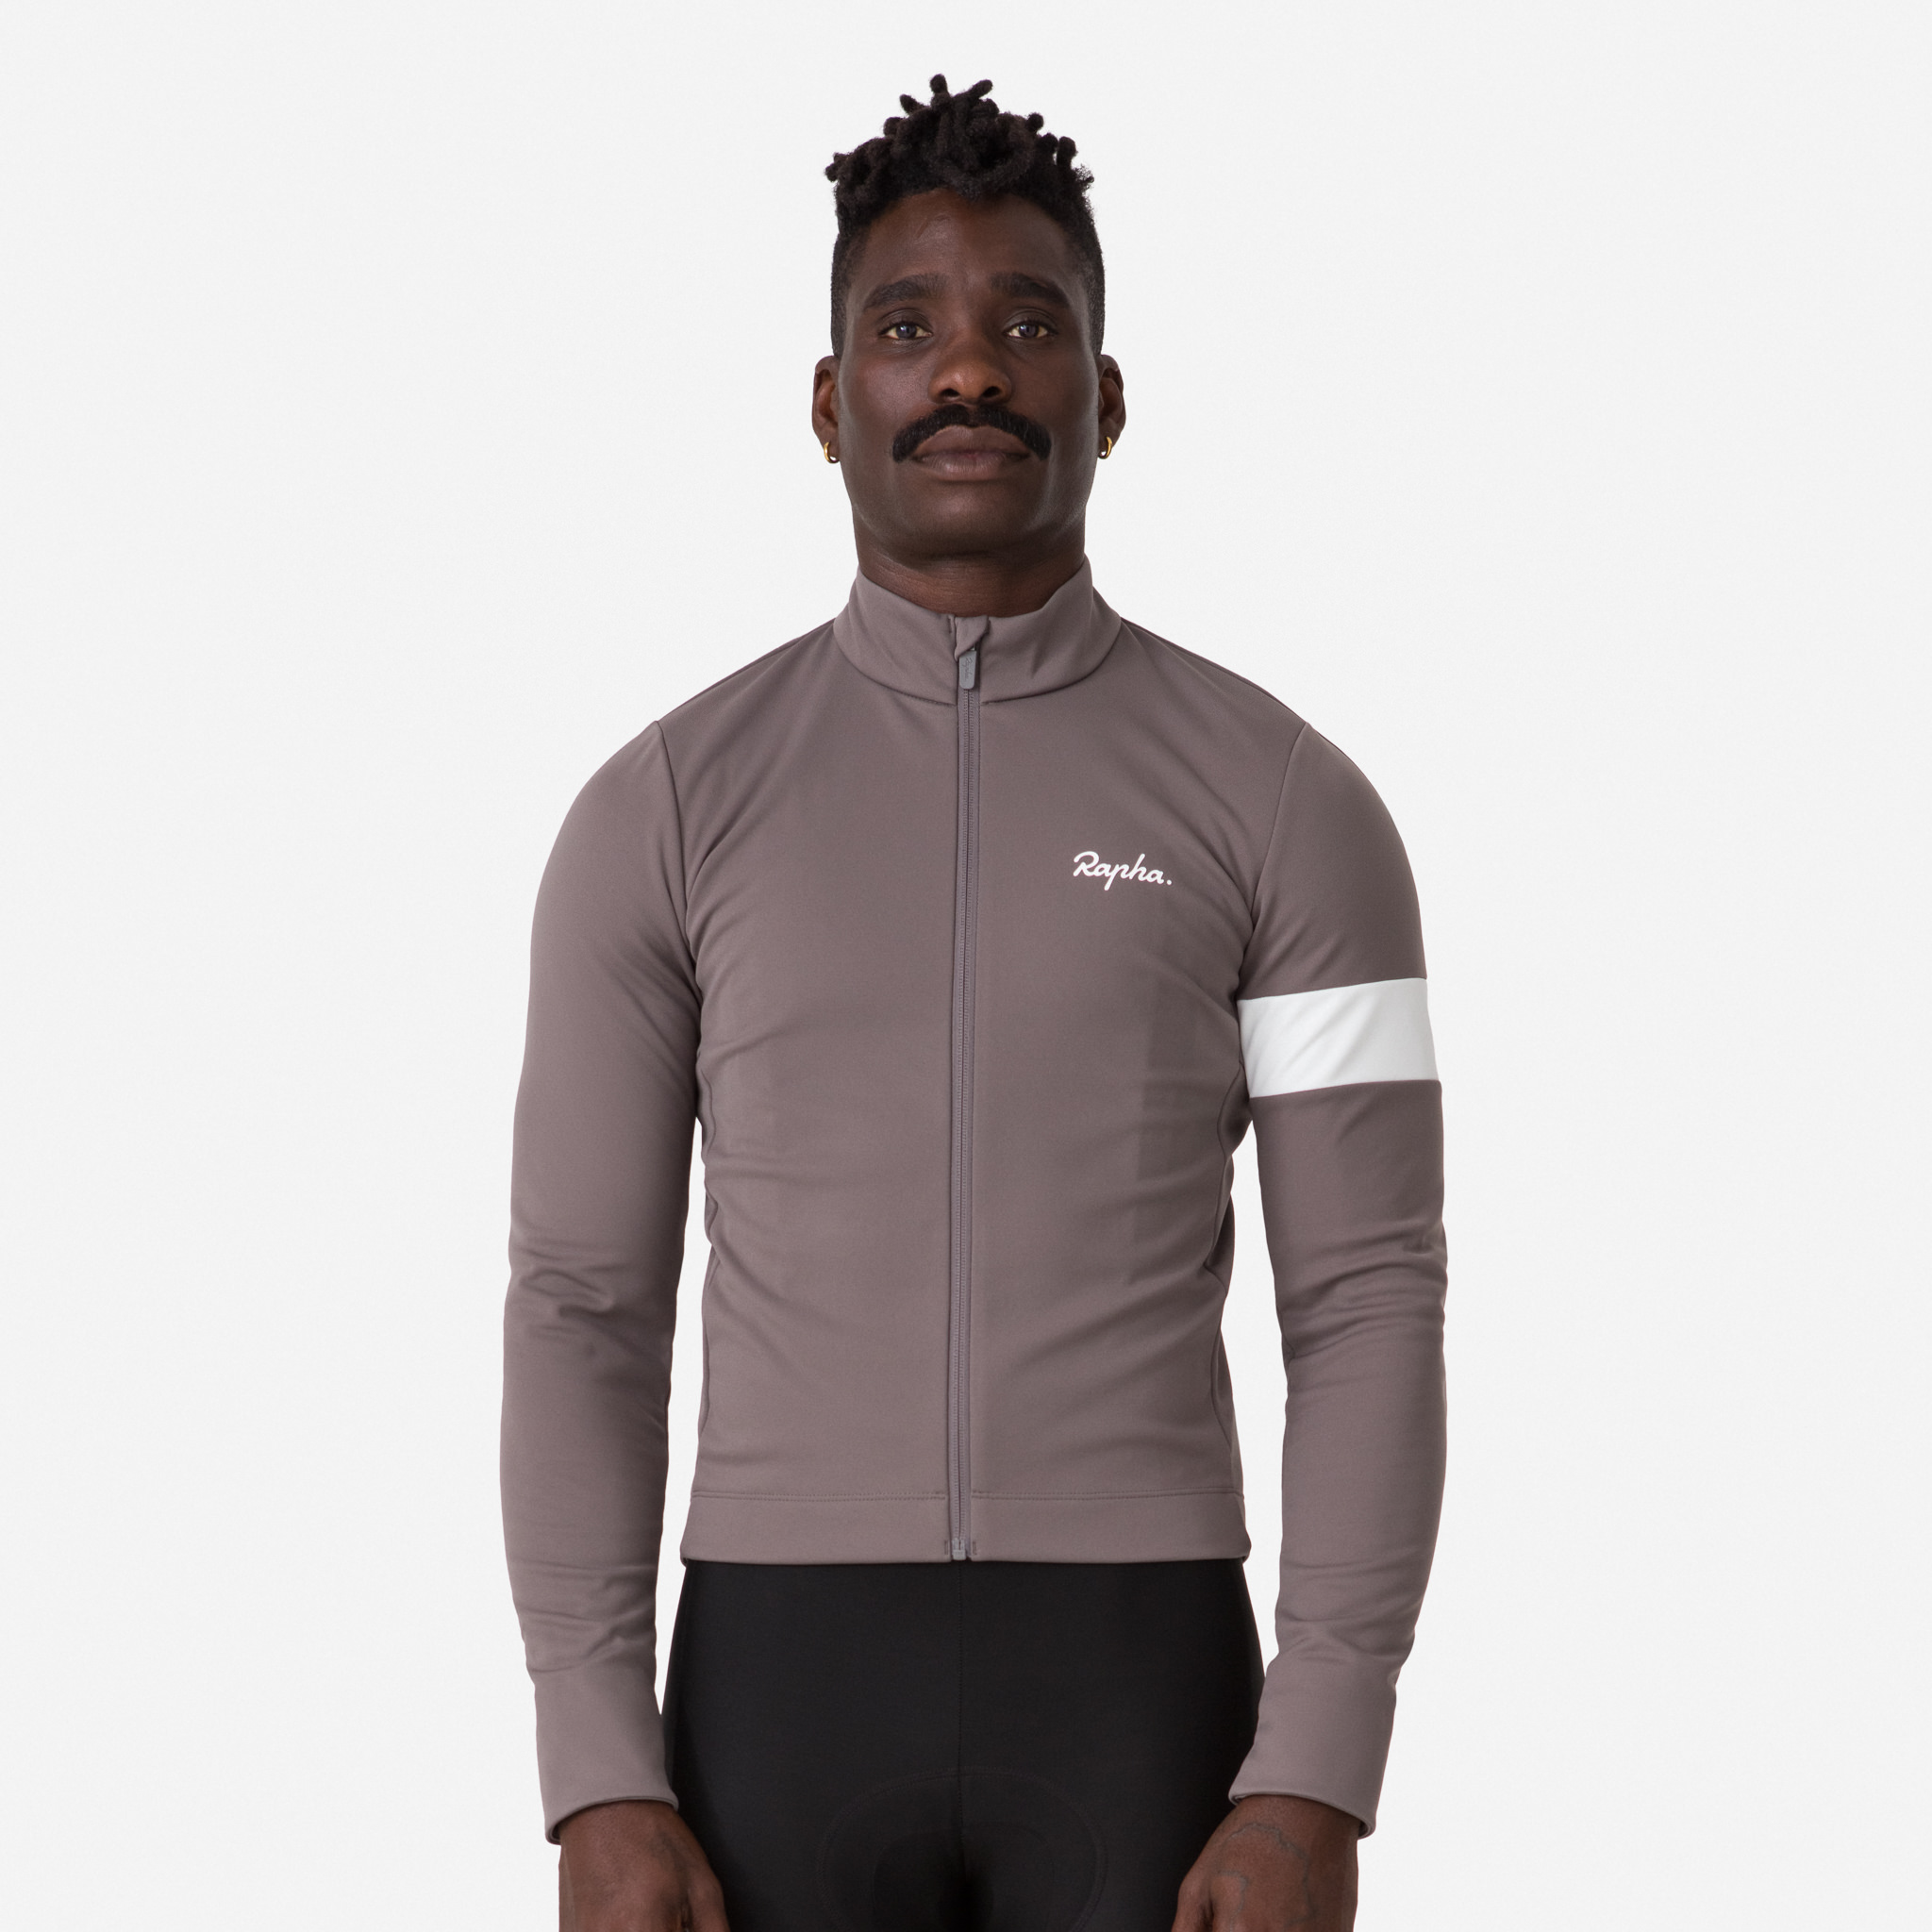 Rapha - The Core Winter Jacket: The go-to for your training and commuting  in the cold, with a dual-fabric construction for smart protection and  comfort. Shop womens: ow.ly/k8jH30fujxU Shop mens: ow.ly/T6Kg30fujsF